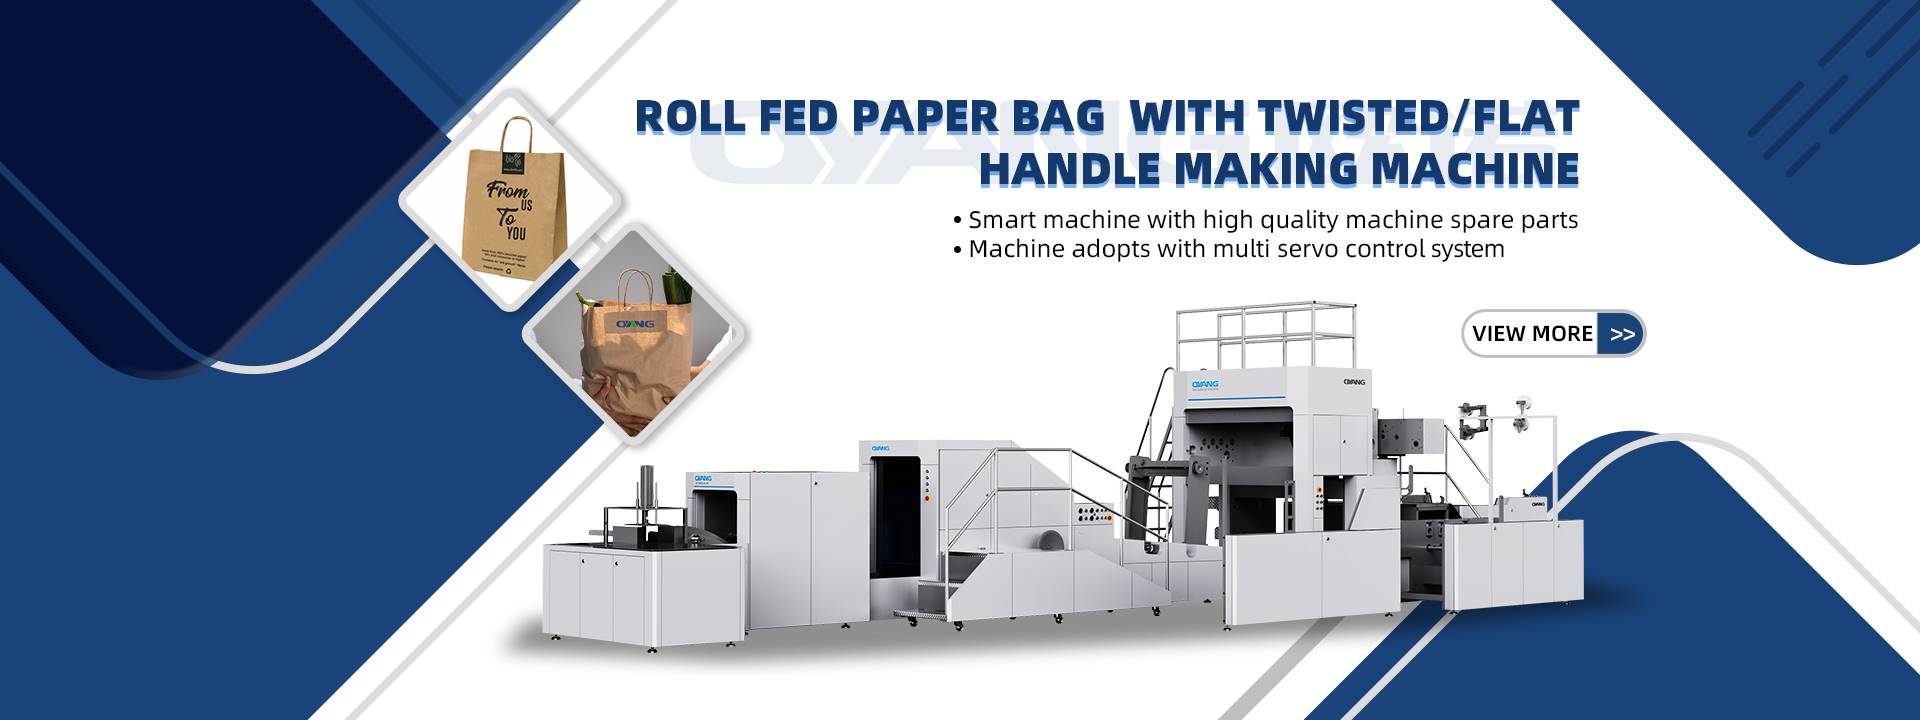 Paper Cover Making Machine in Mumbai at best price by Hanje Hydrotech -  Justdial